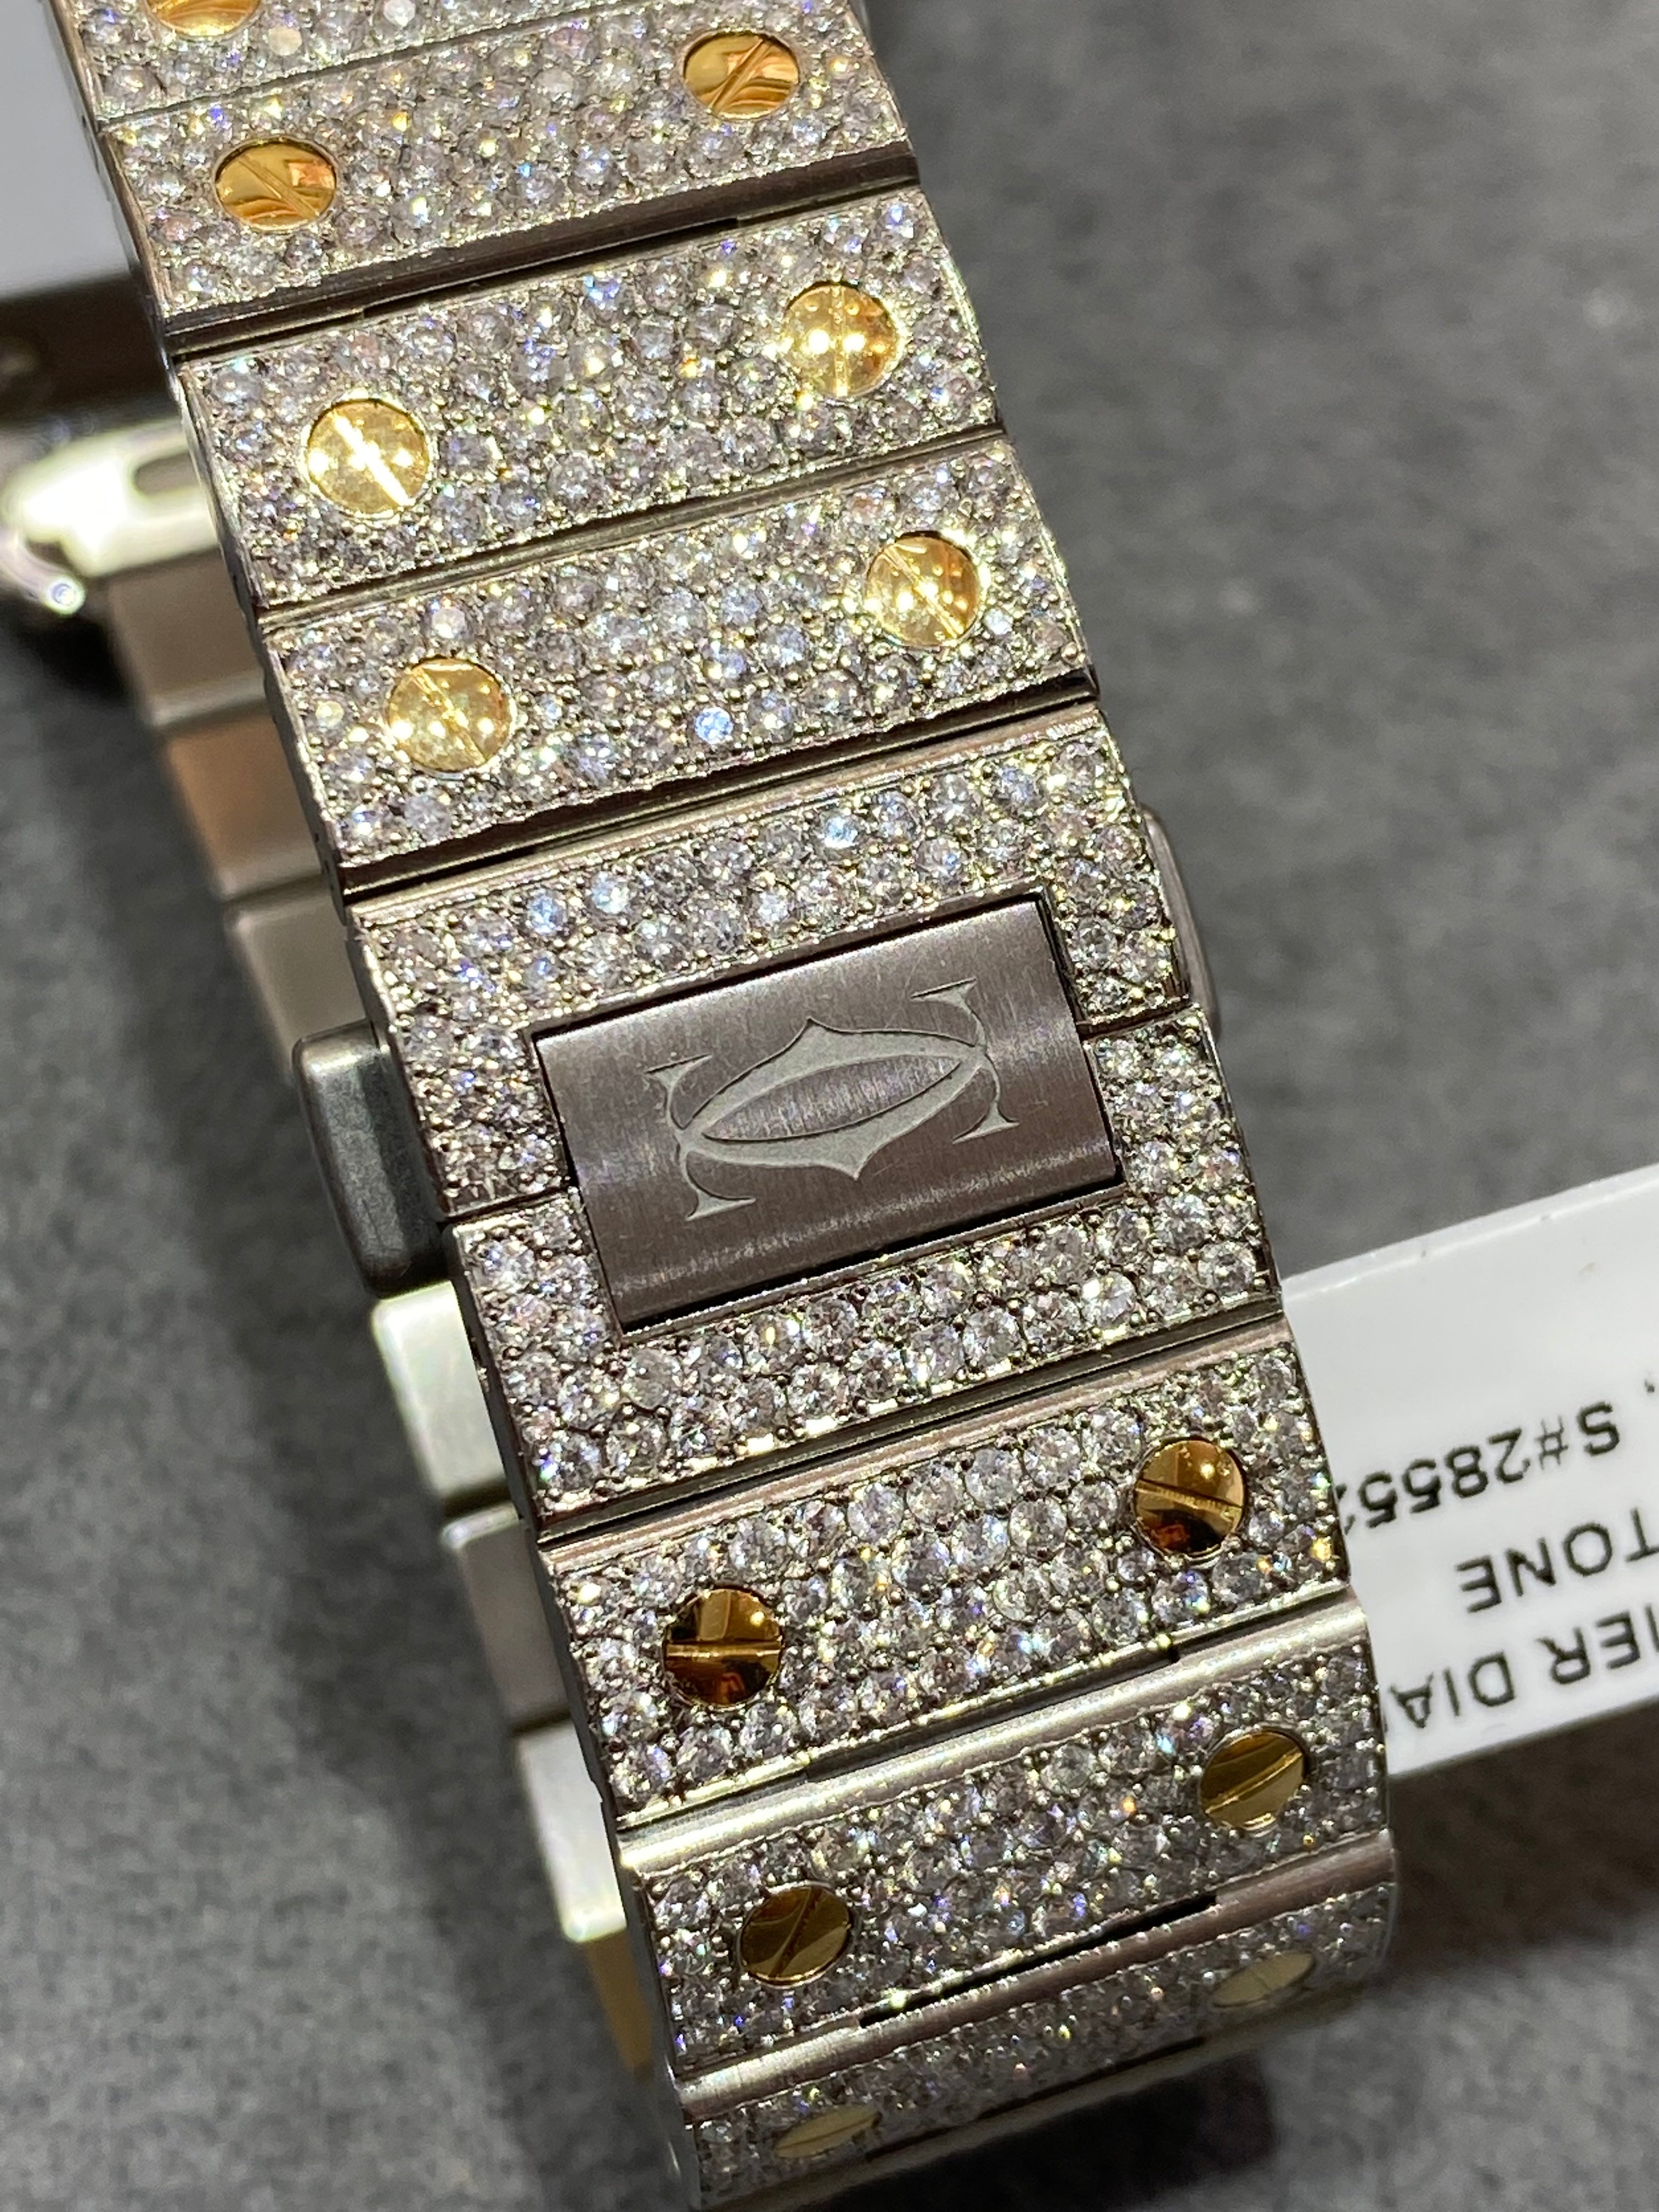 new 41 mm cartier santos xl watch “iced bustdown “2-tone 18k screws on band vs1 natural 💎22cts.t.w.